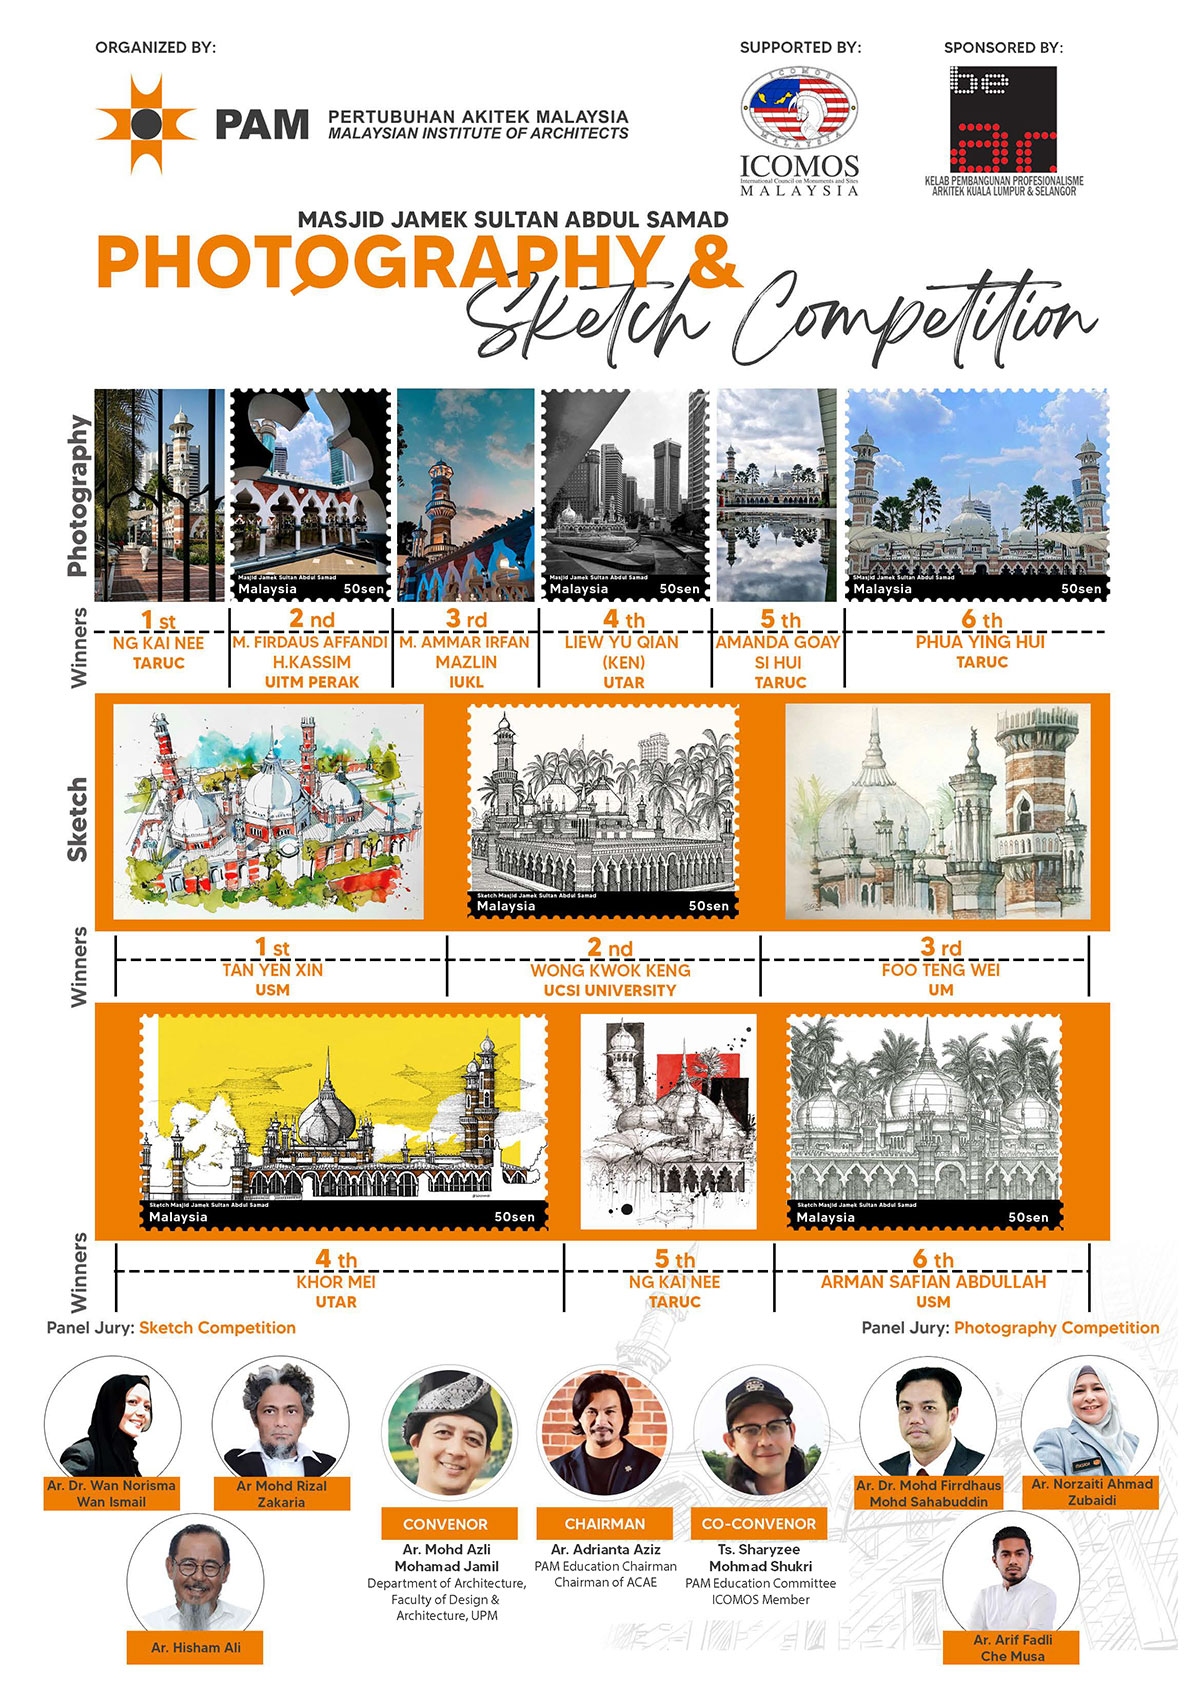 Announcement of Winners Masjid Jamek Sultan Abdul Samad Photography & Sketch Competition 2022